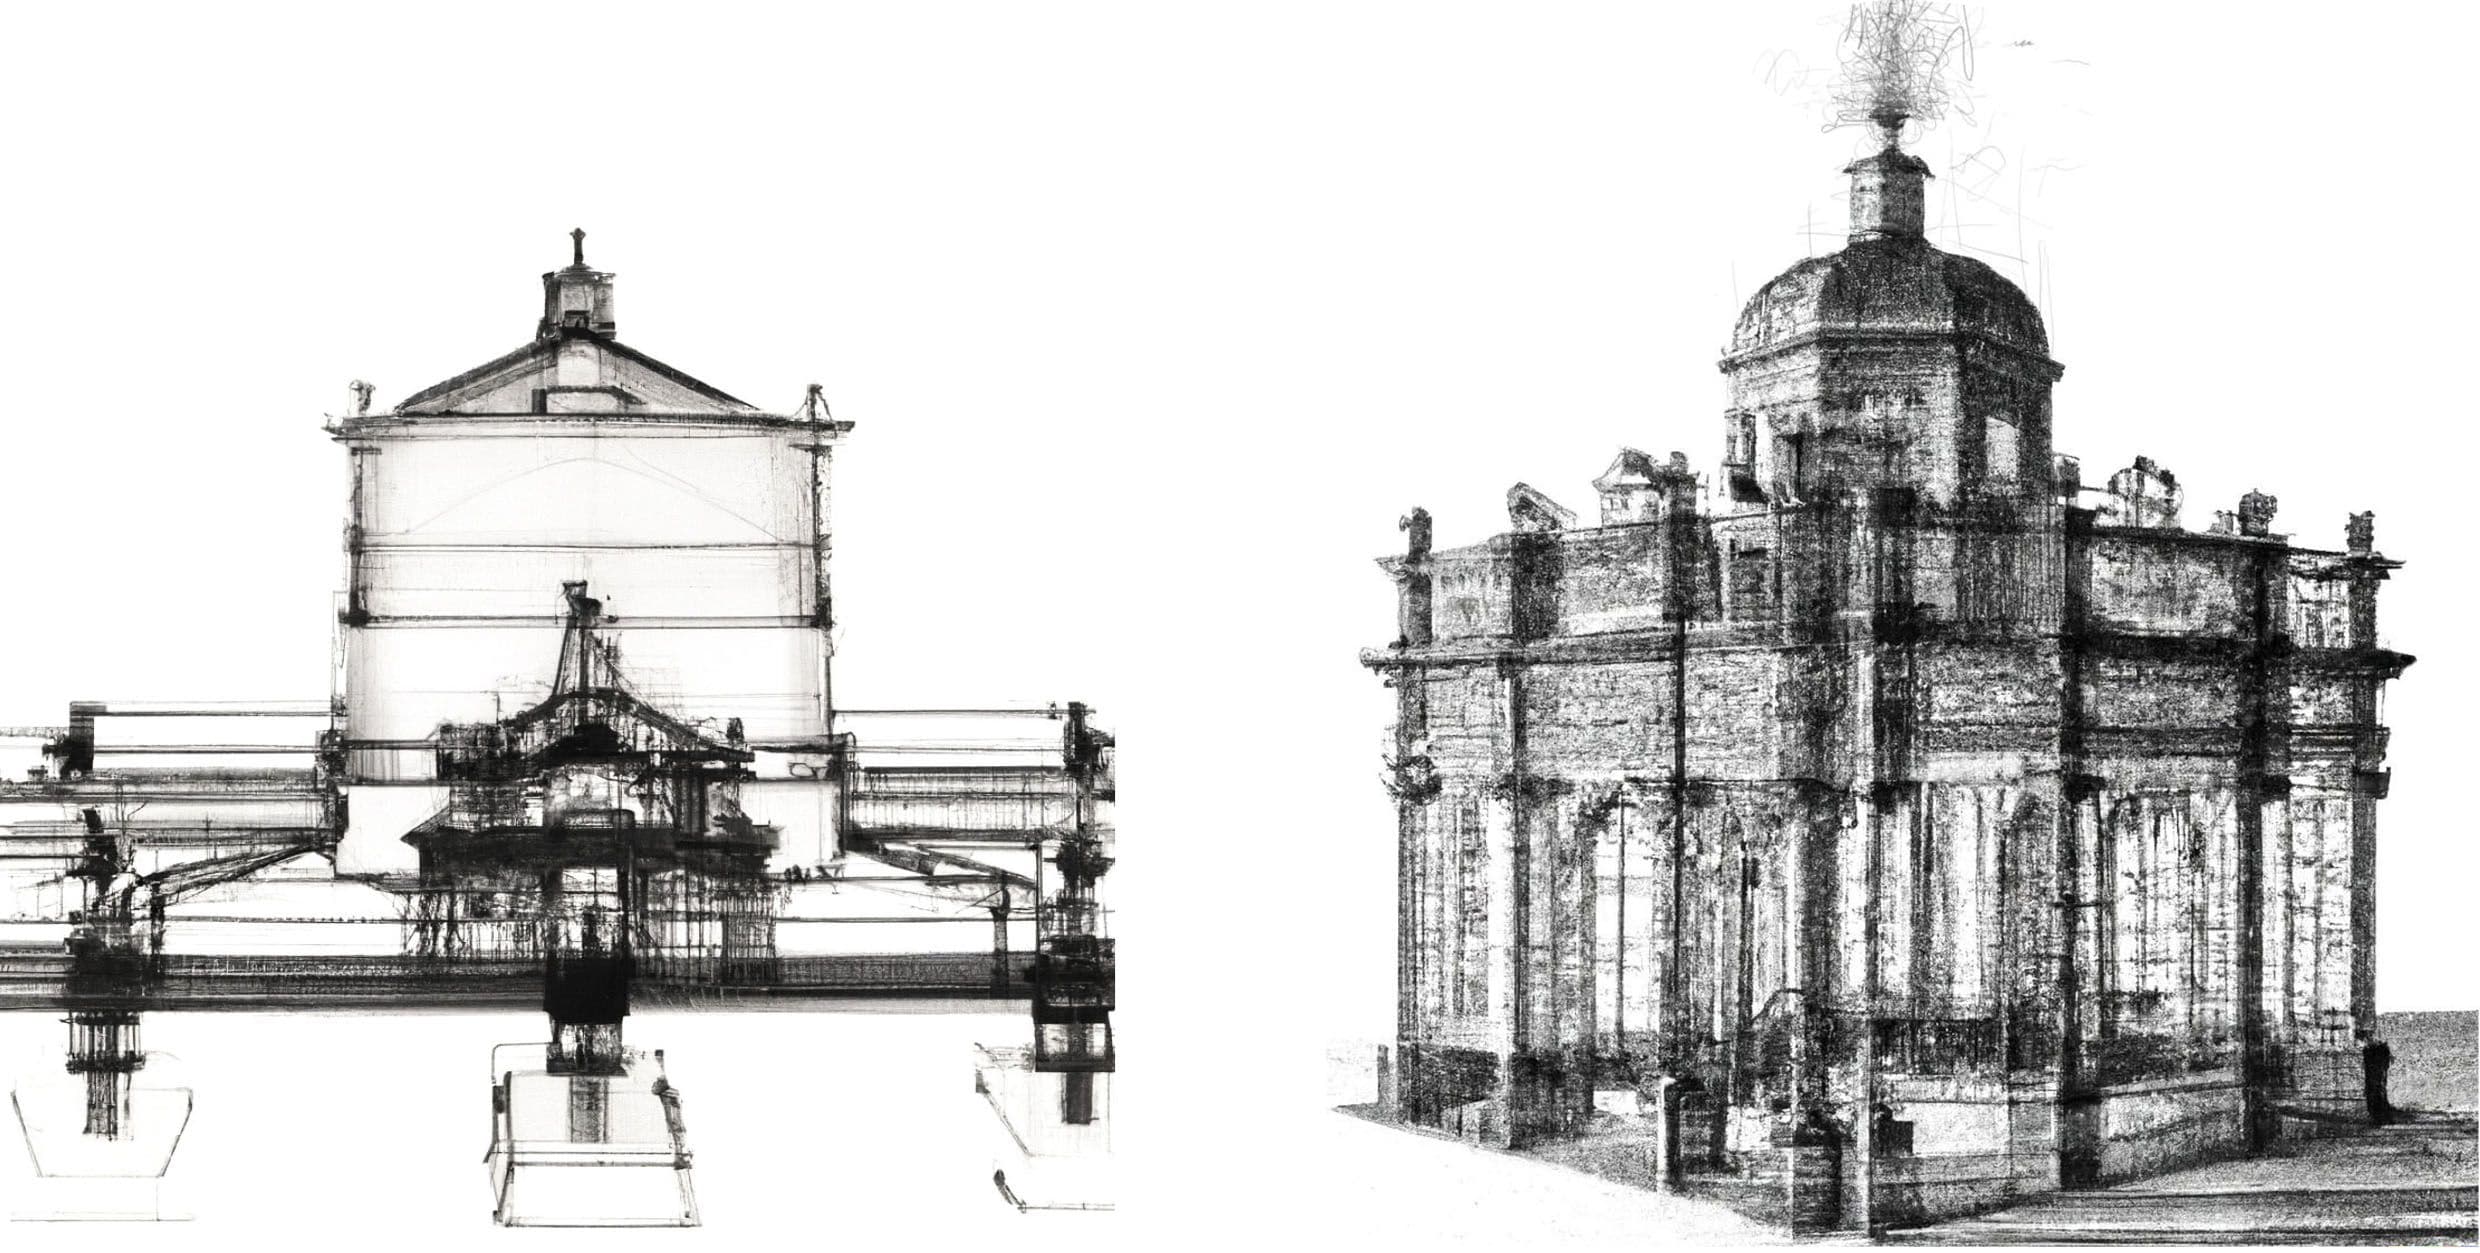 Picture of Hypothetical digital 3D reconstruction of the Solomon's Temple as if it were published in a 17th century treatise written by Blaise Pascal